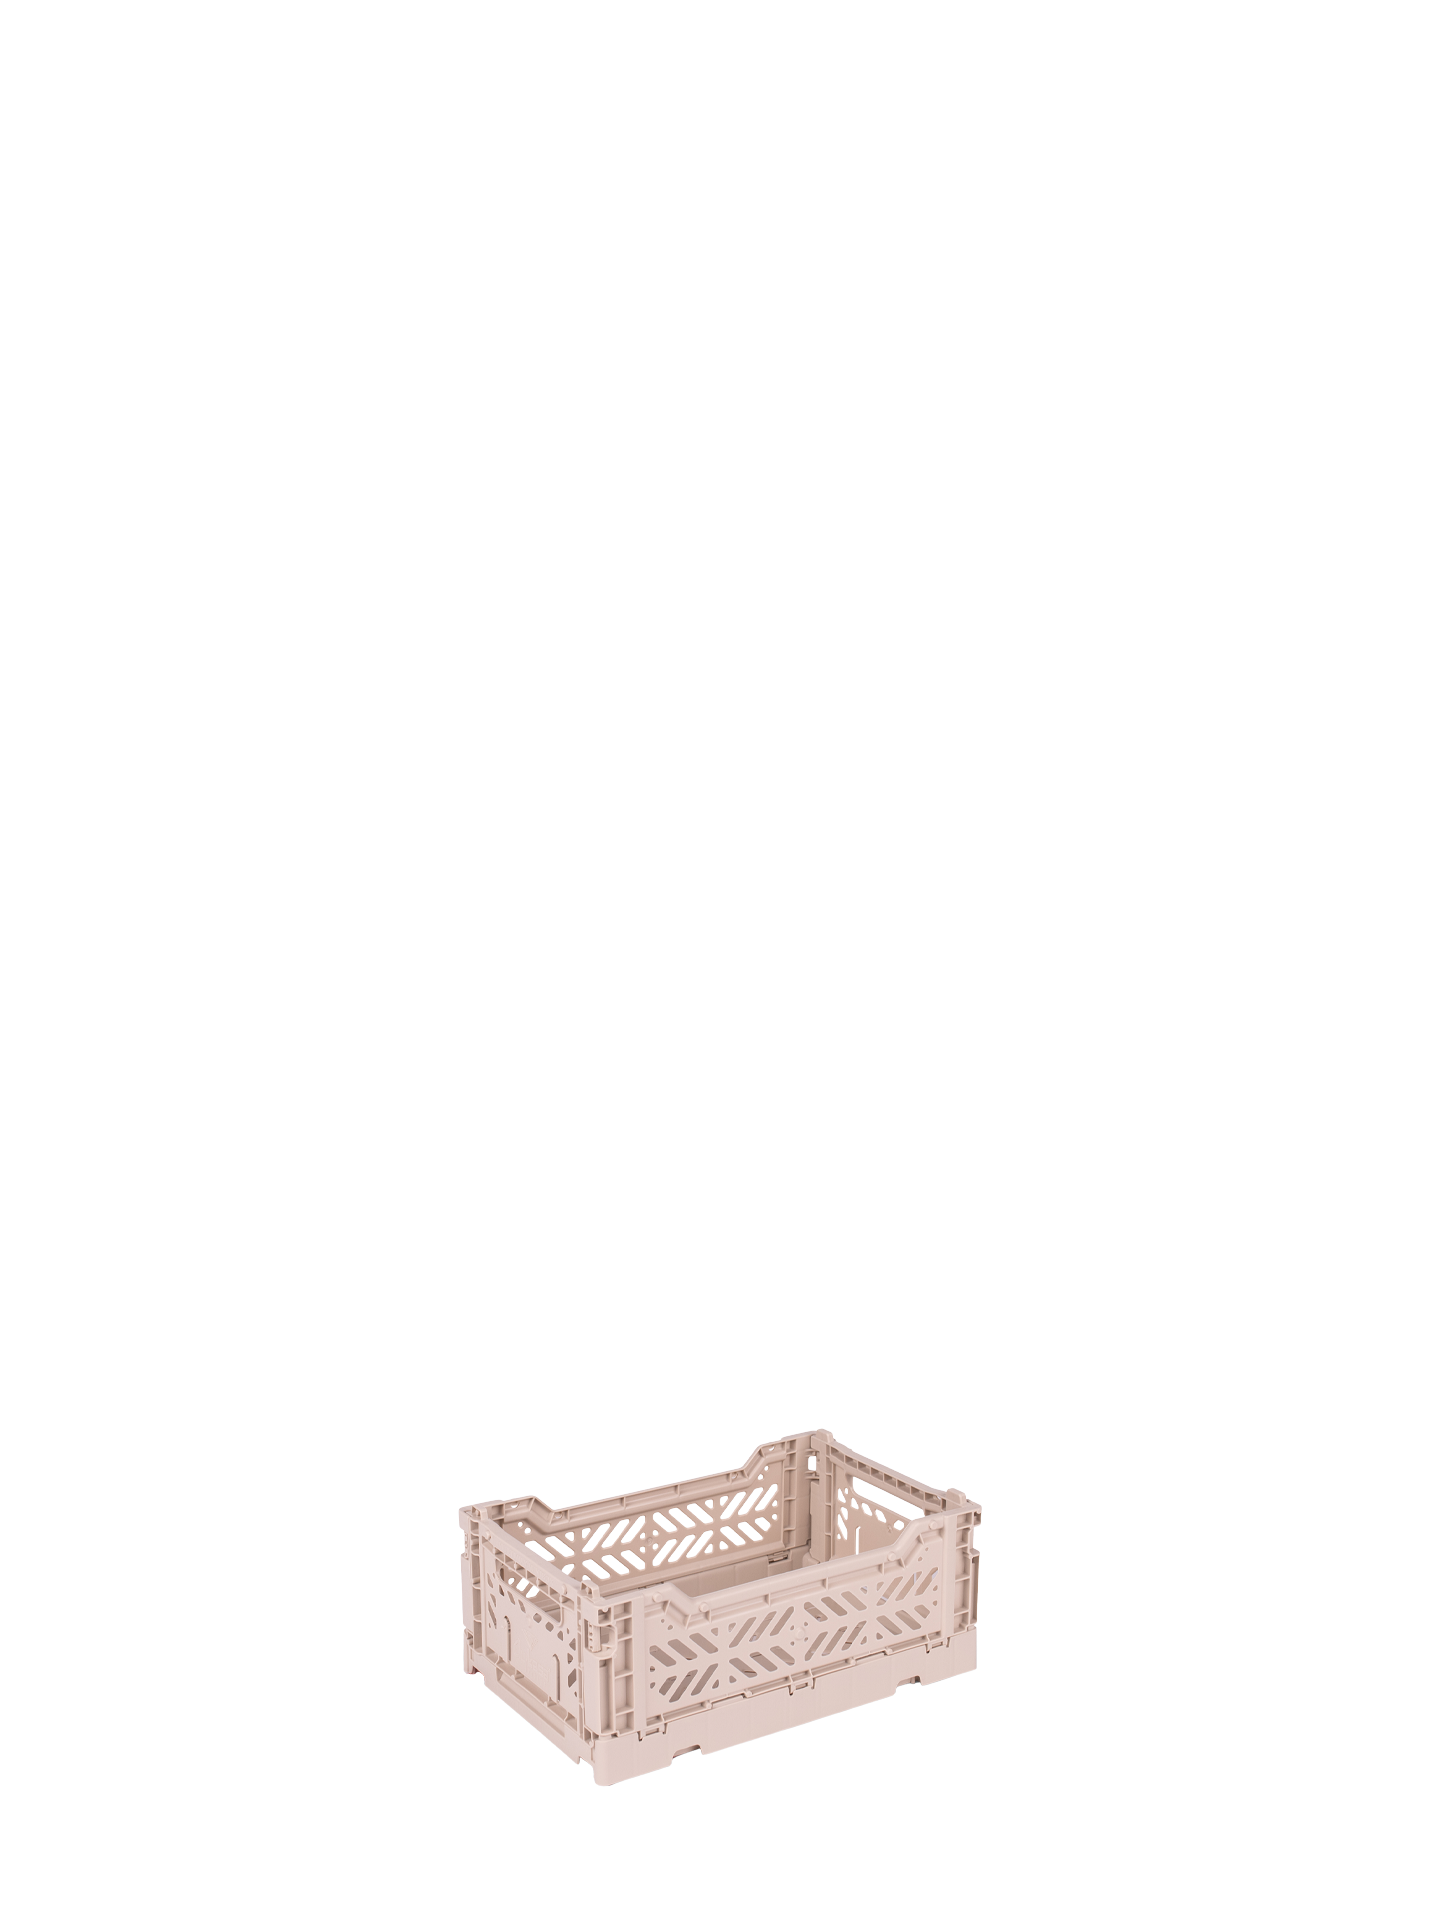 Mini Aykasa crate in pale beige sand stacks and folds